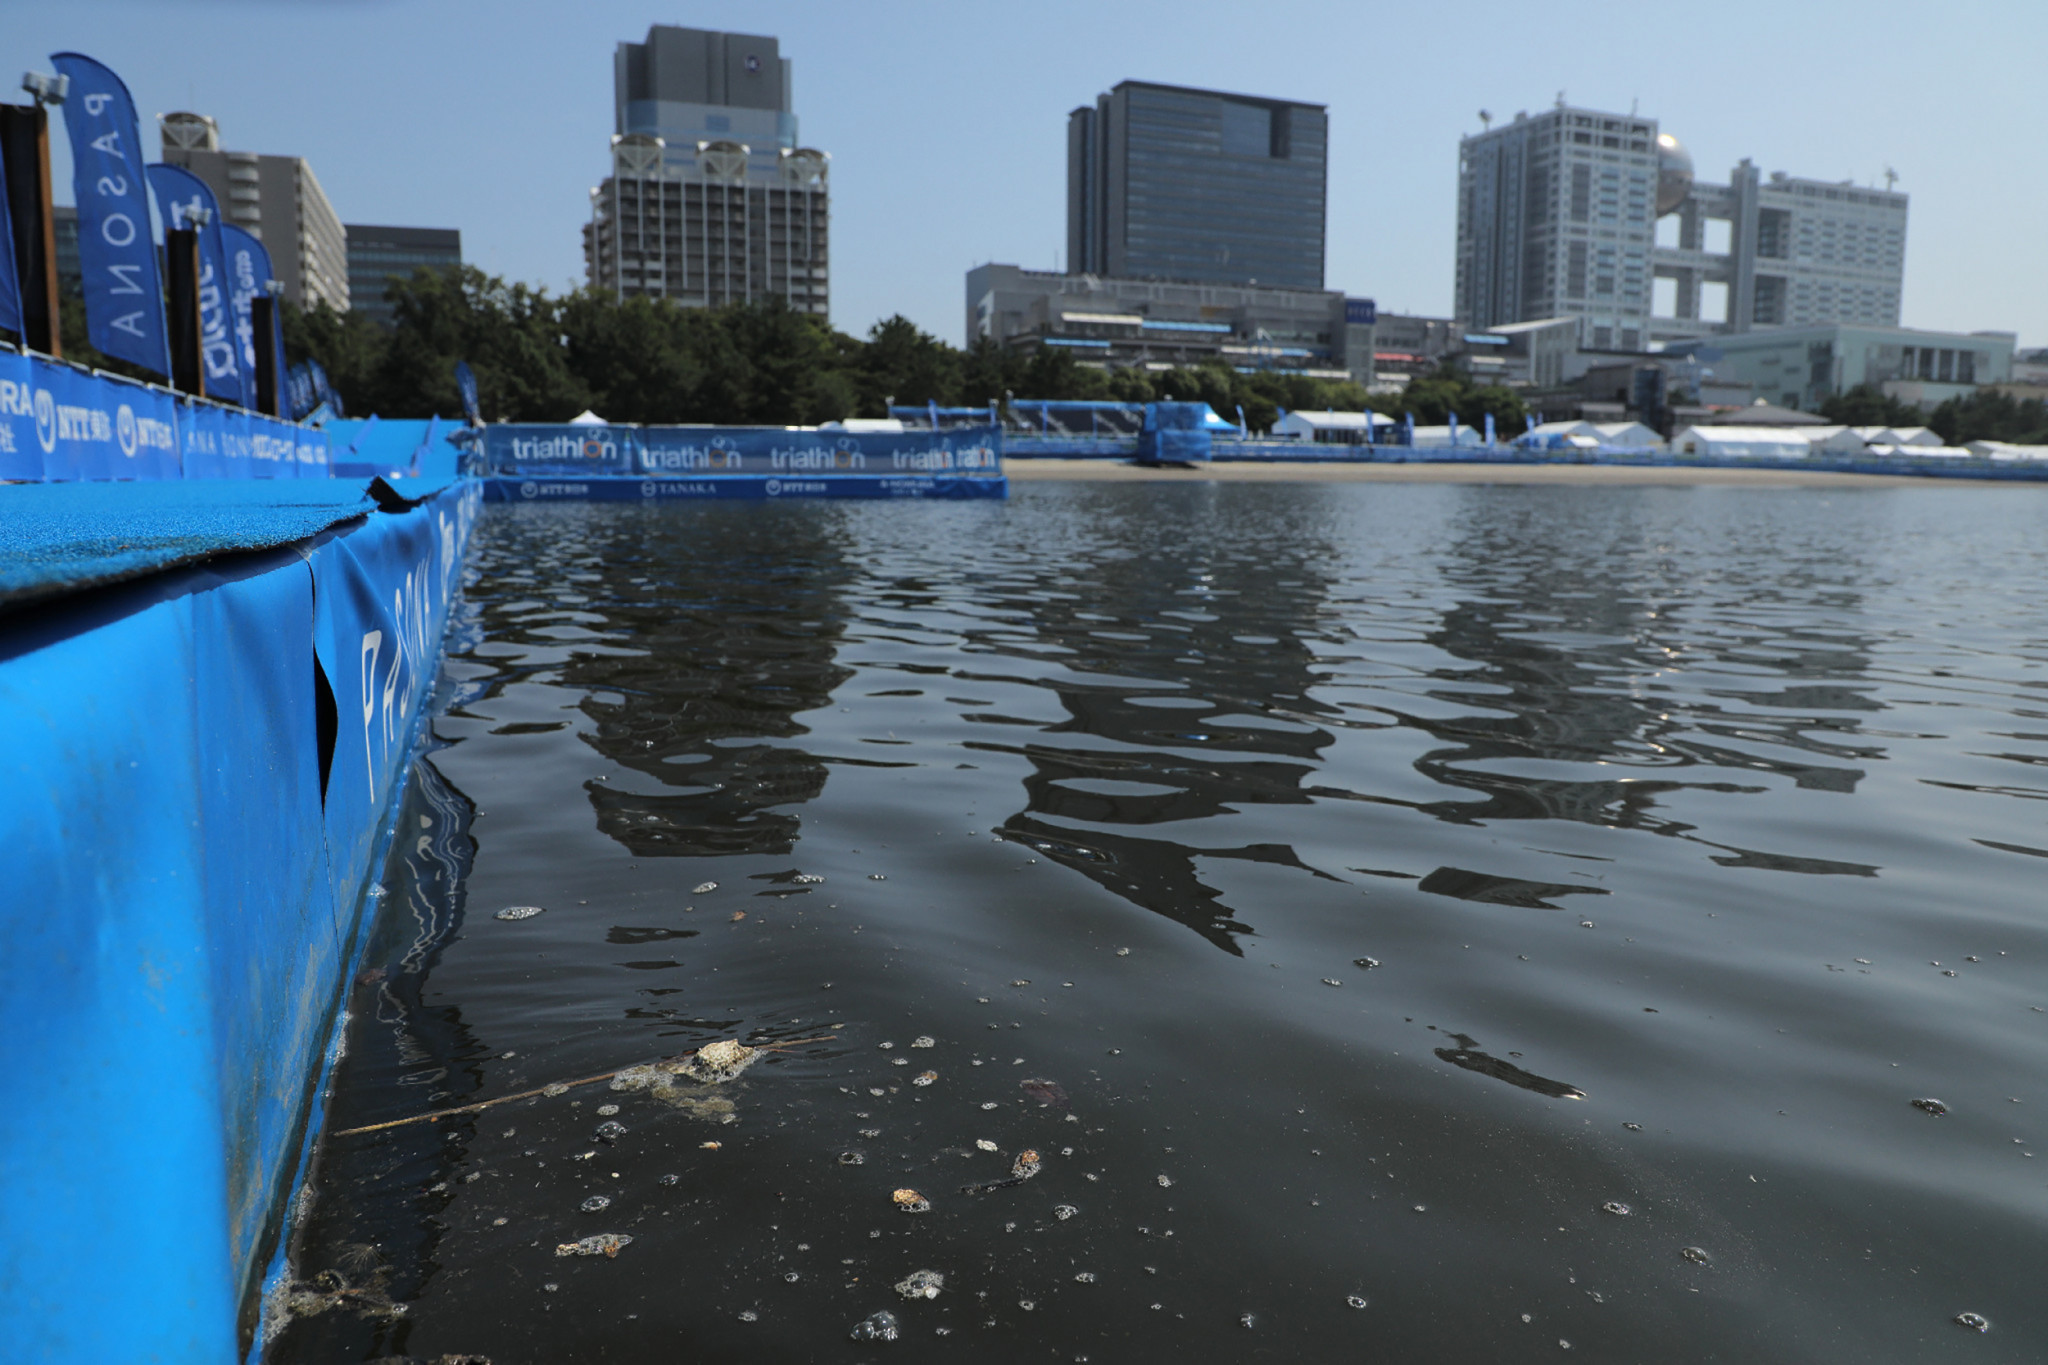 The Tokyo Metropolitan Government has put forward proposals for water quality improvements ahead of Tokyo 2020 ©Getty Images